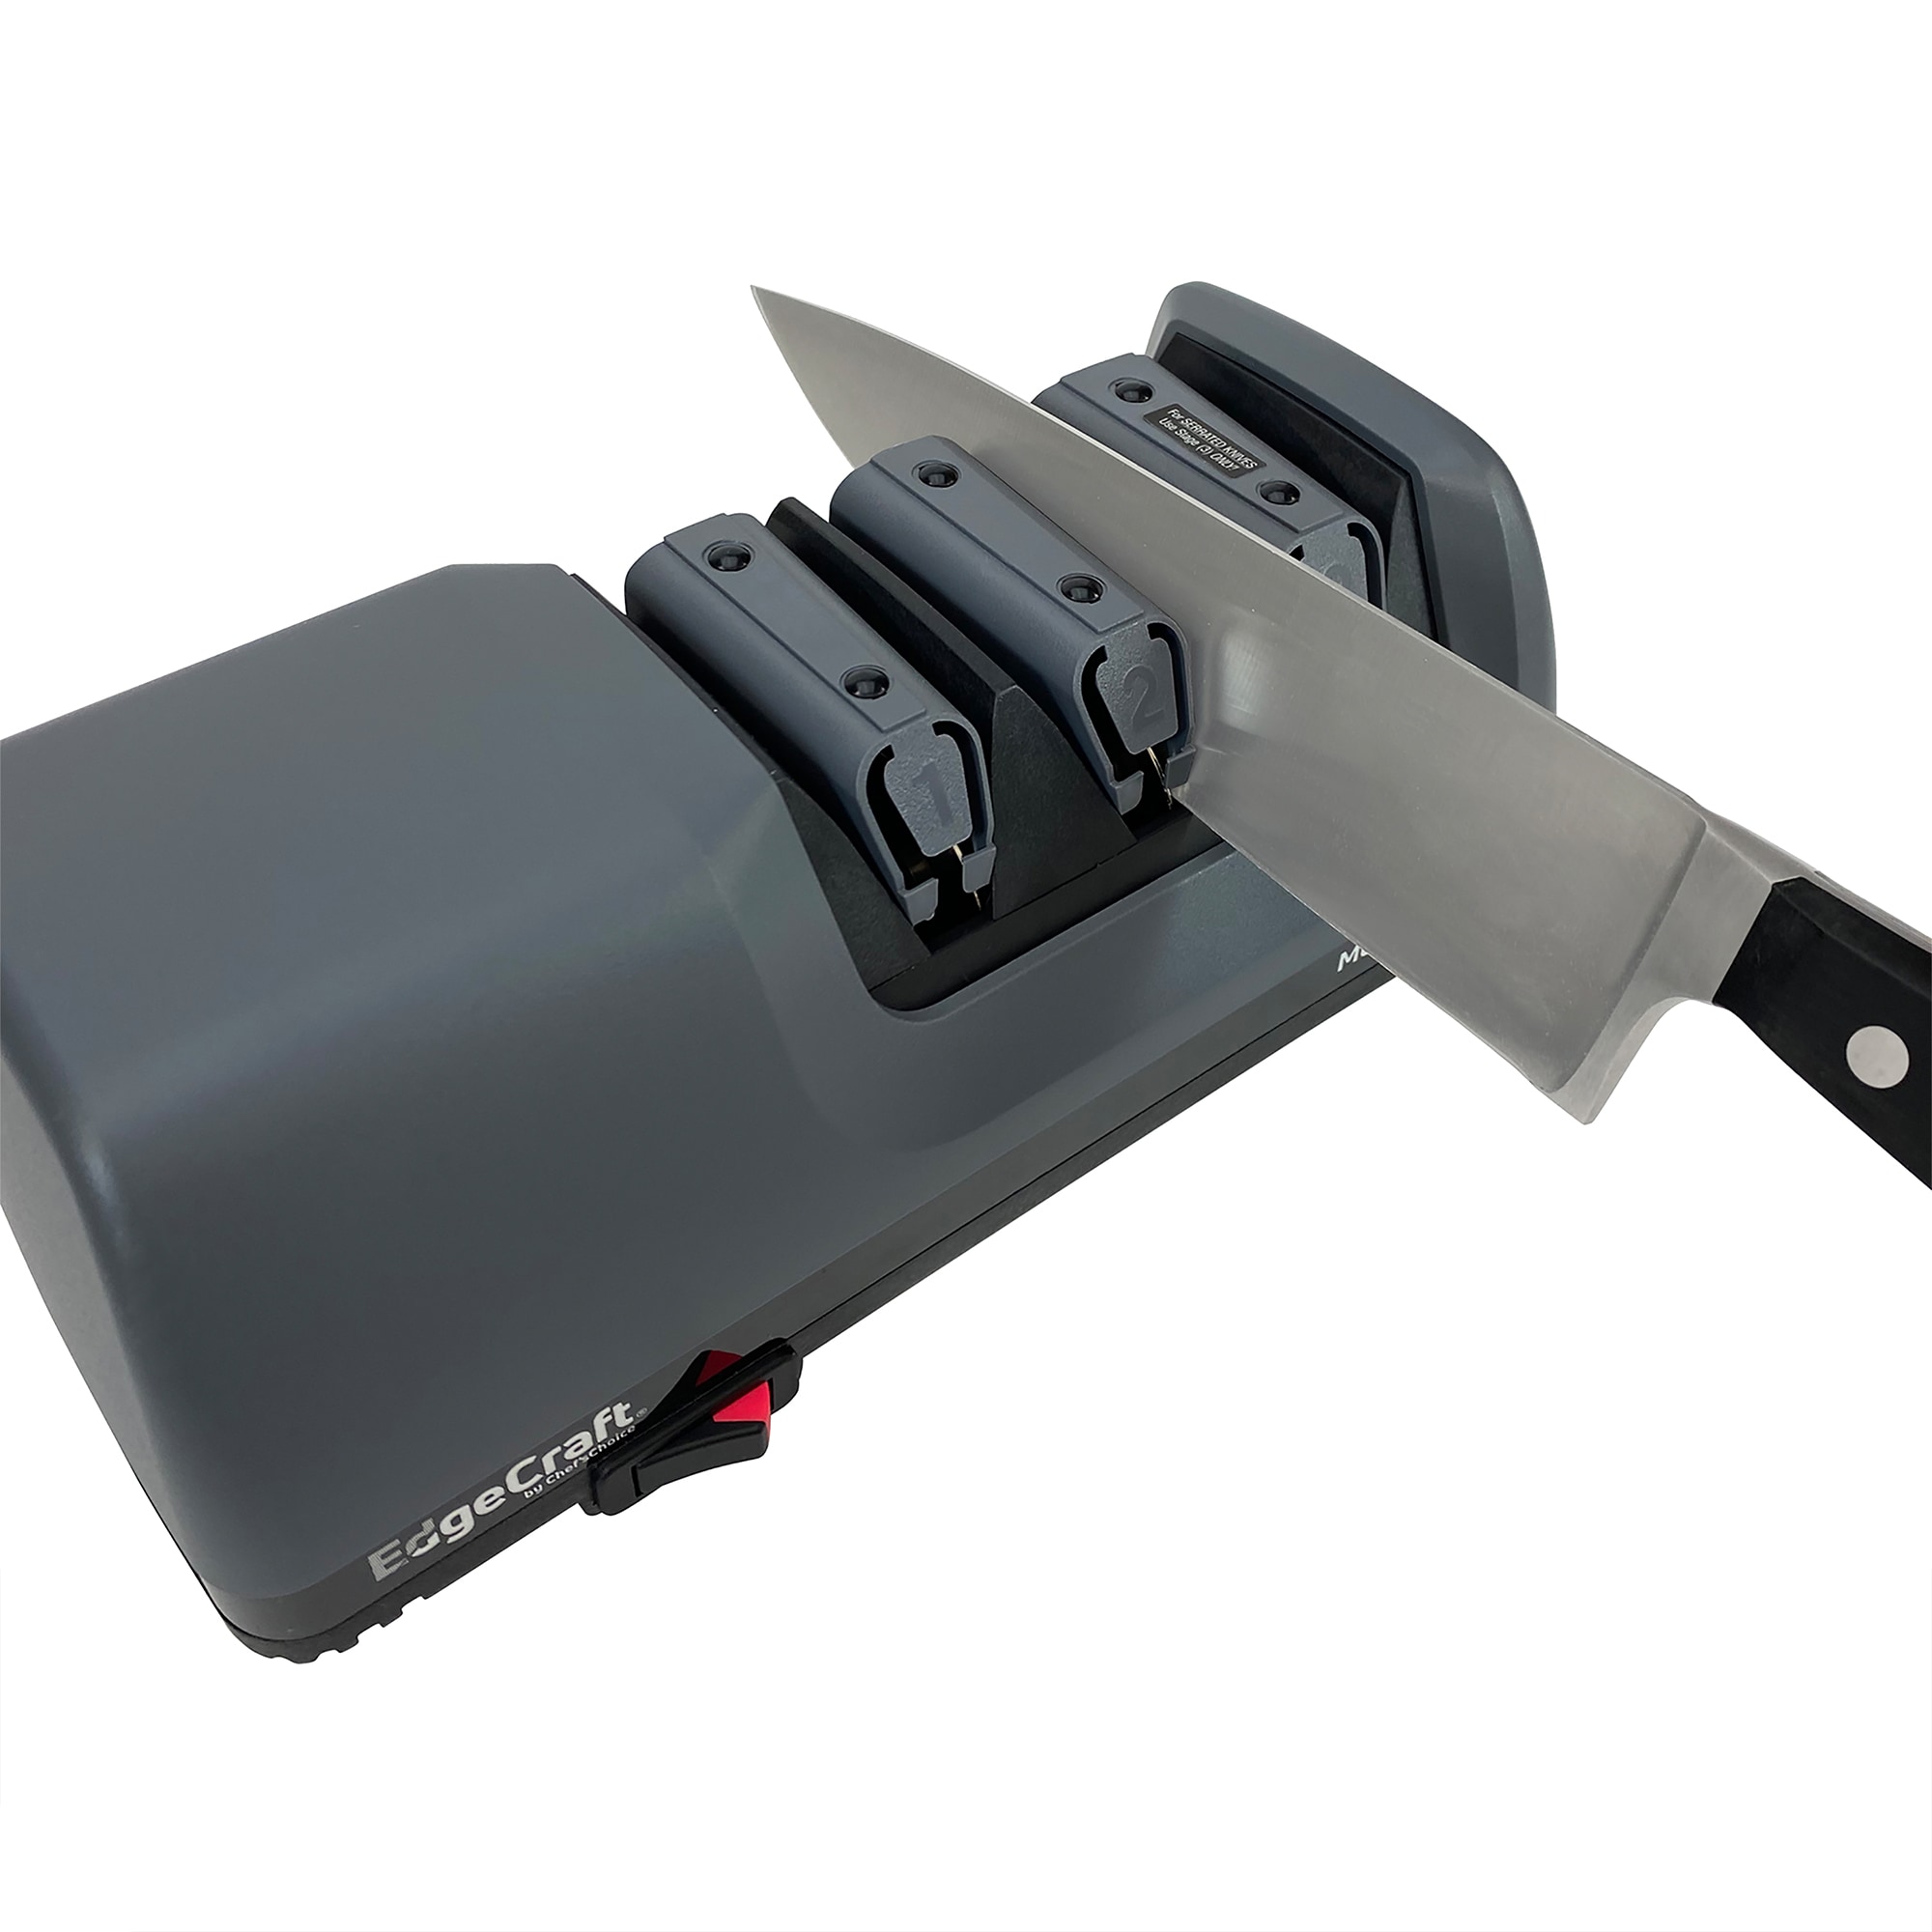 Chef's Choice Model E1520 Electric Knife Sharpeners SHE152GY11